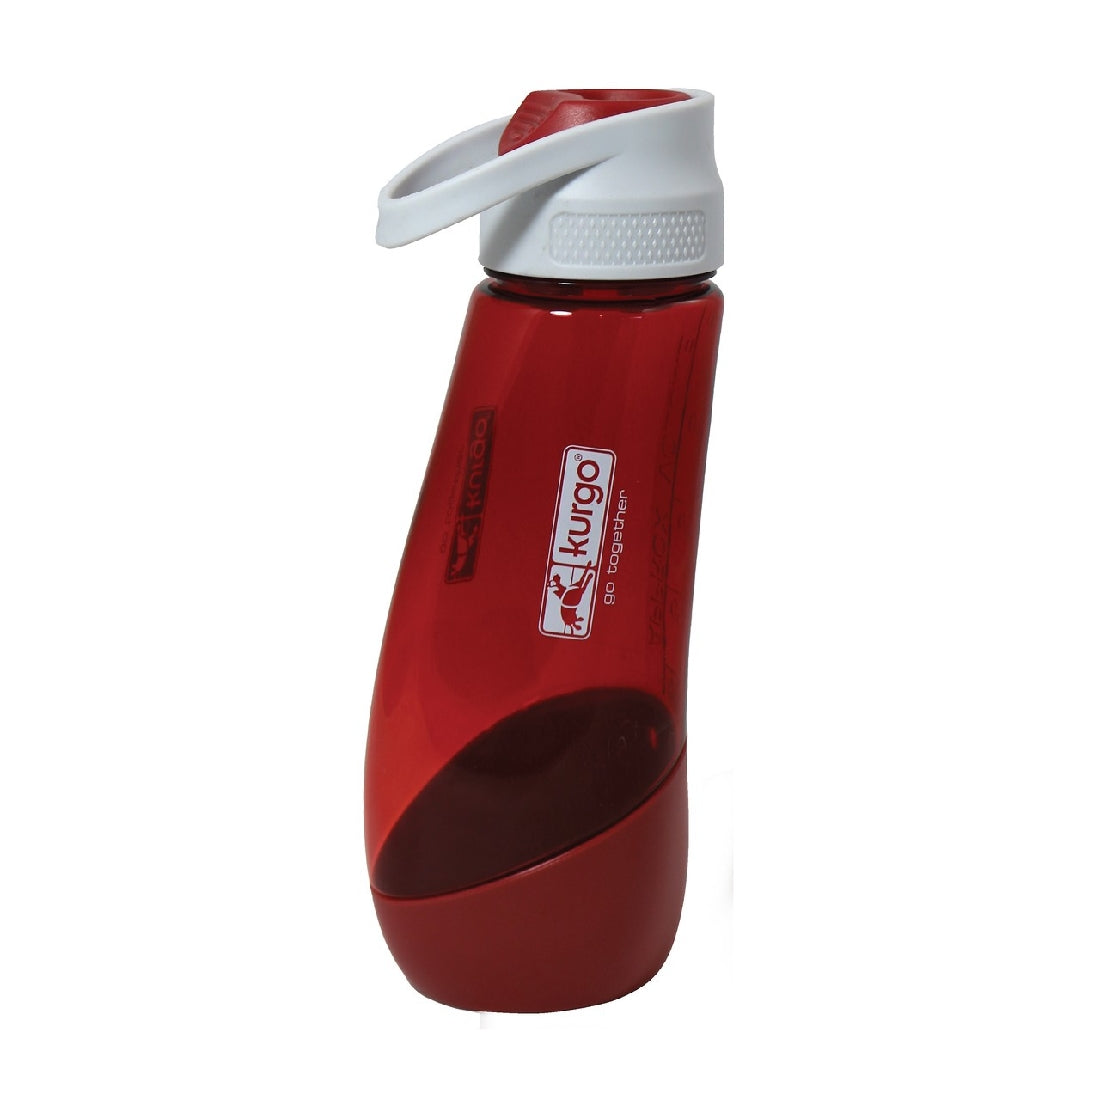 Red plastic water bottle with white cap on white background.